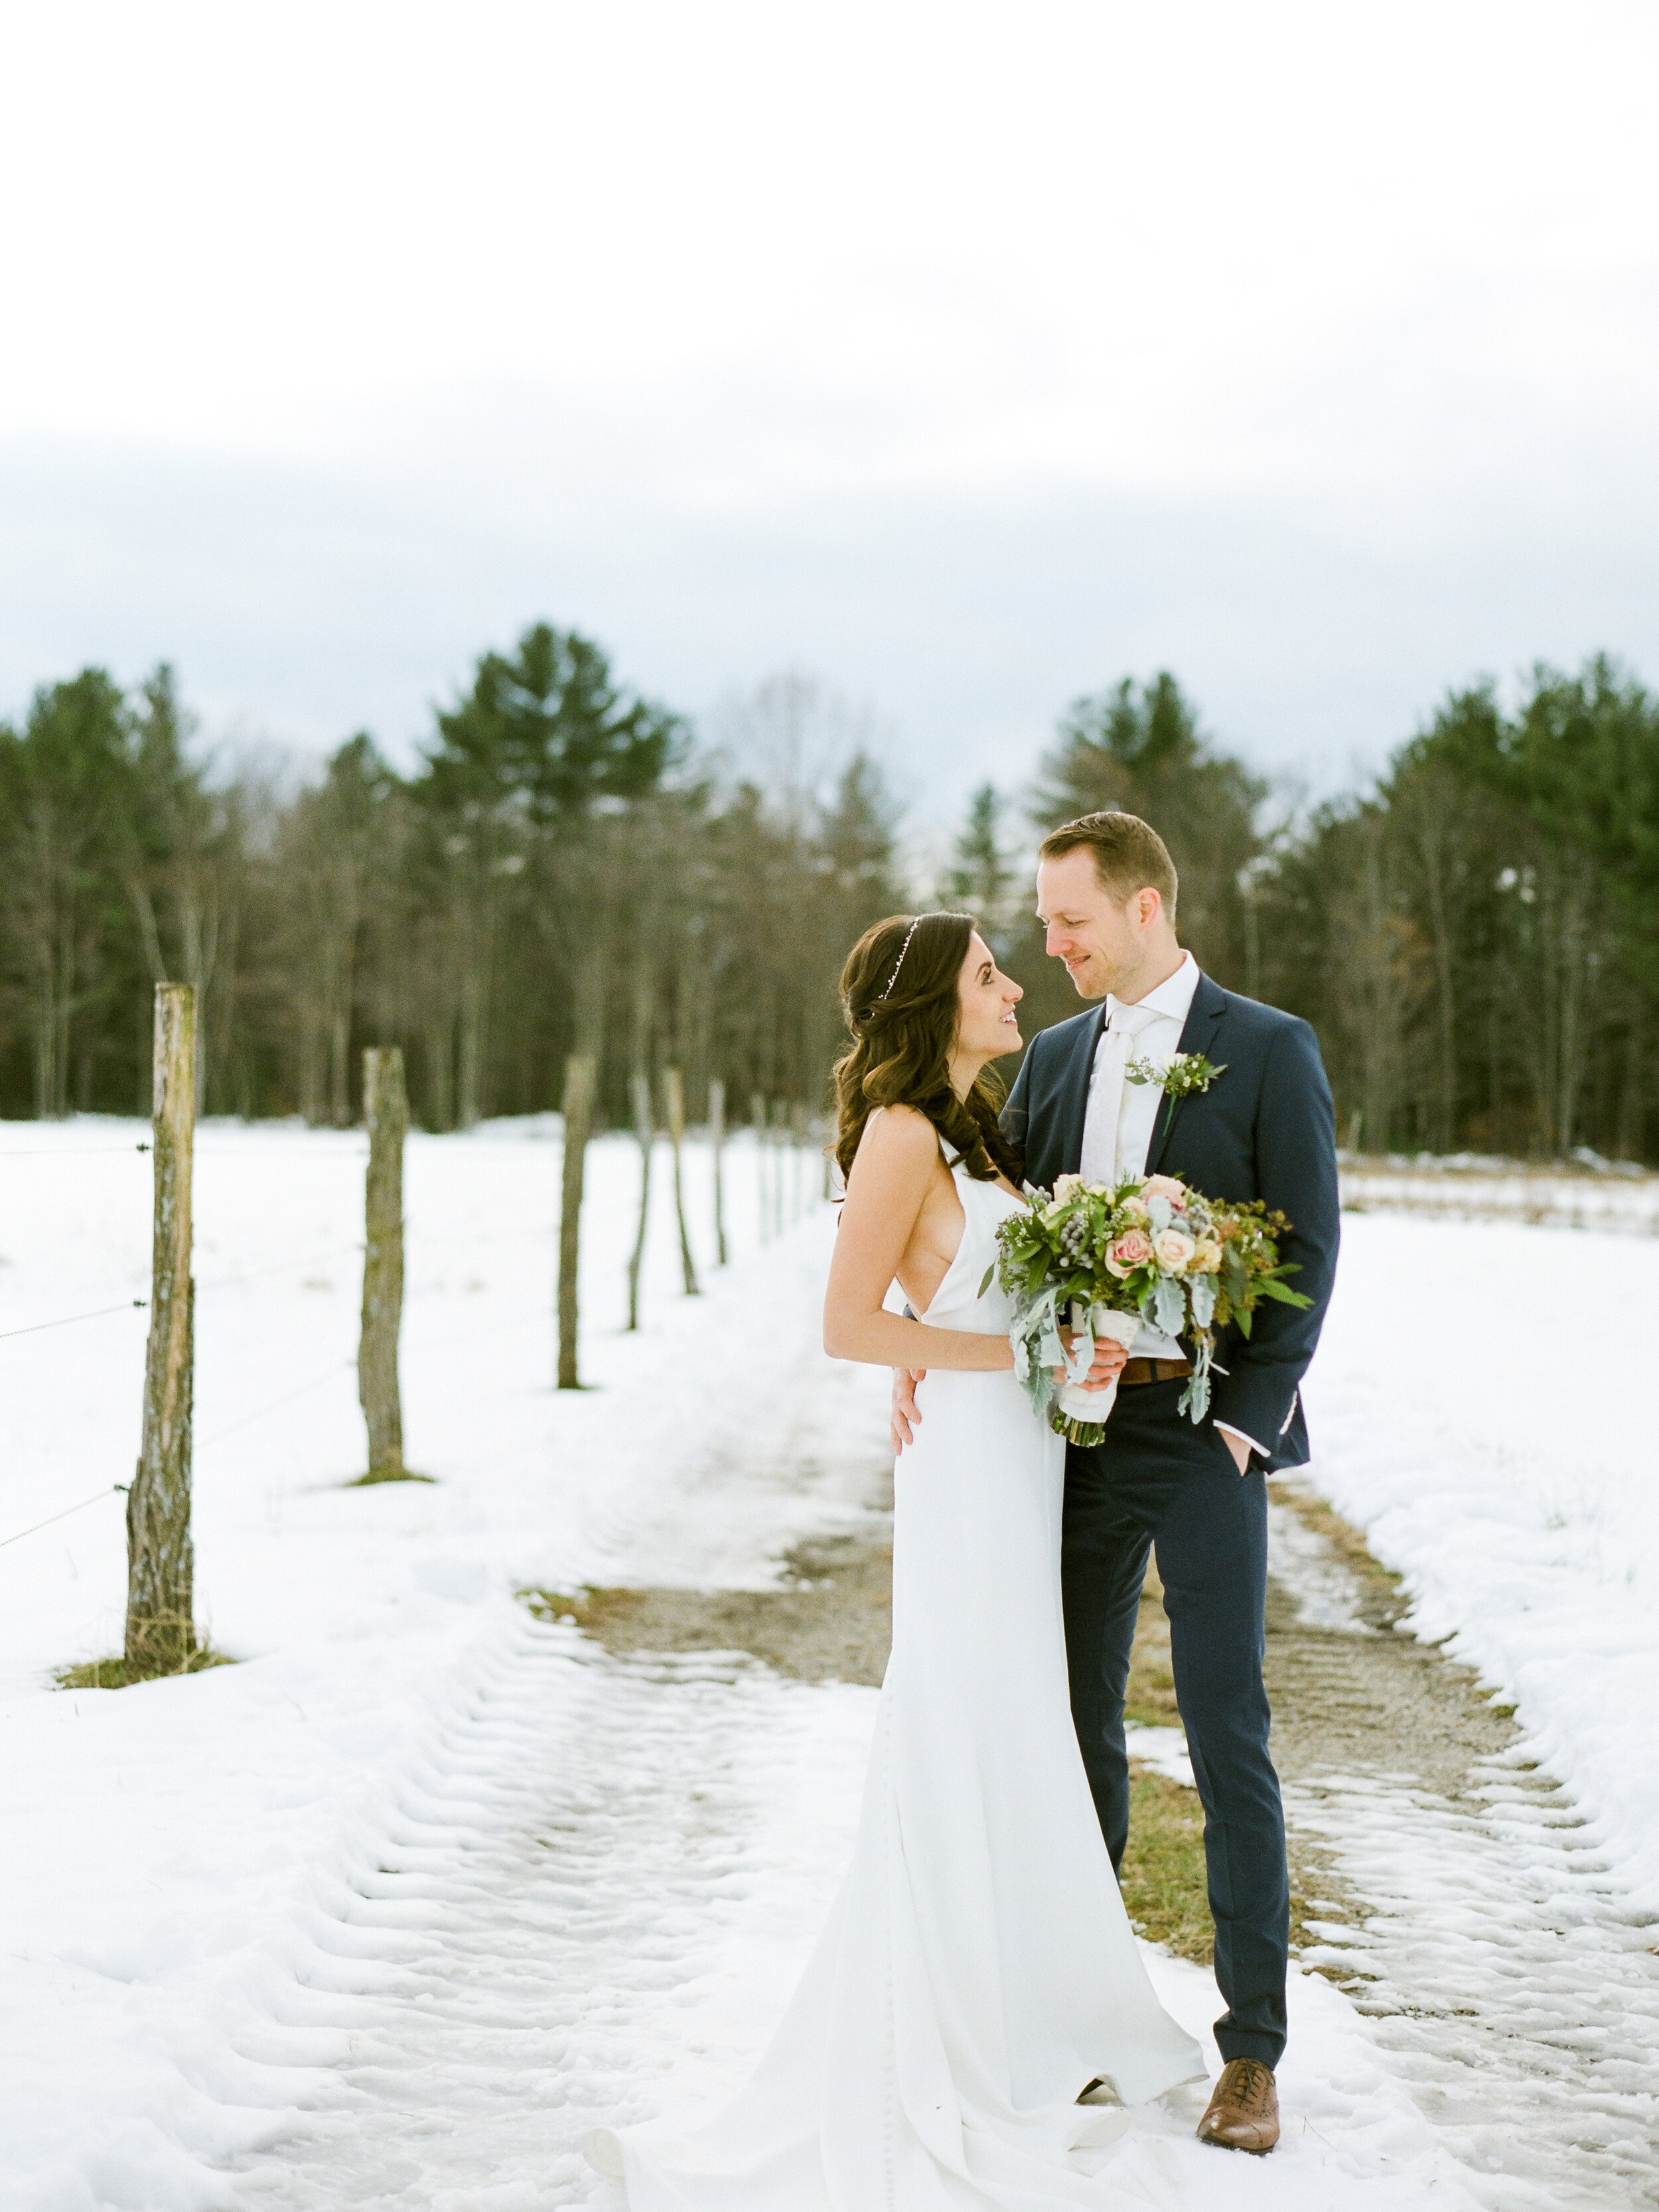 Fine Art Wedding Photography in Amherst MA